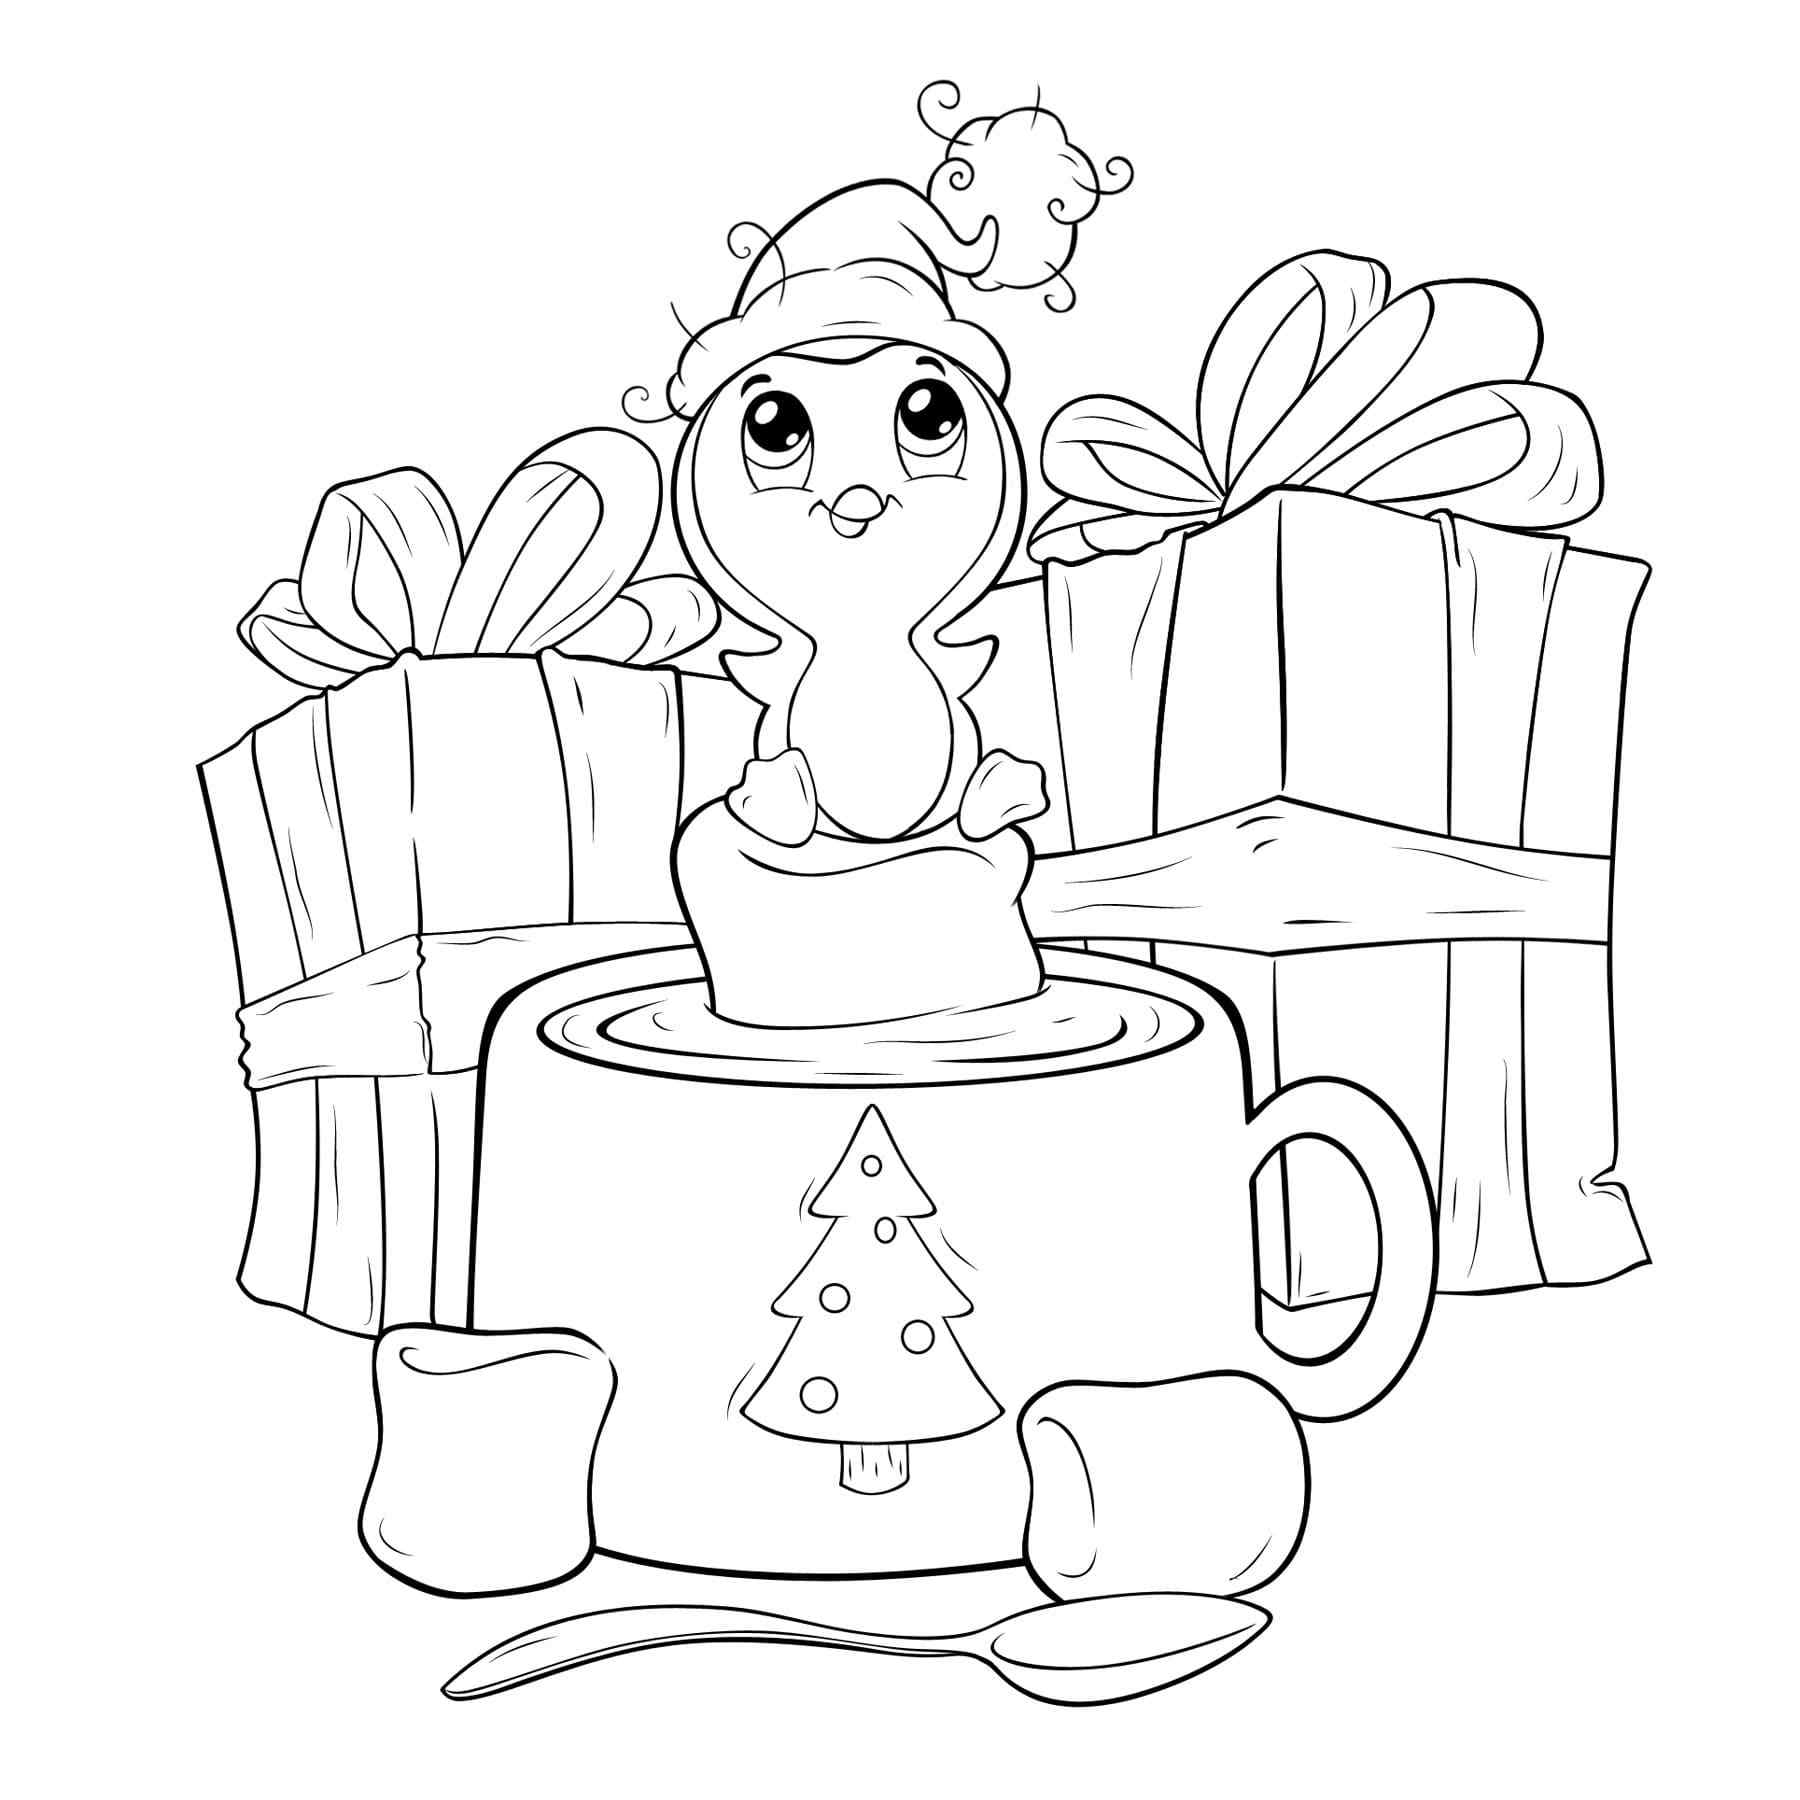 Penguin With Boxes Of Gifts Coloring Page